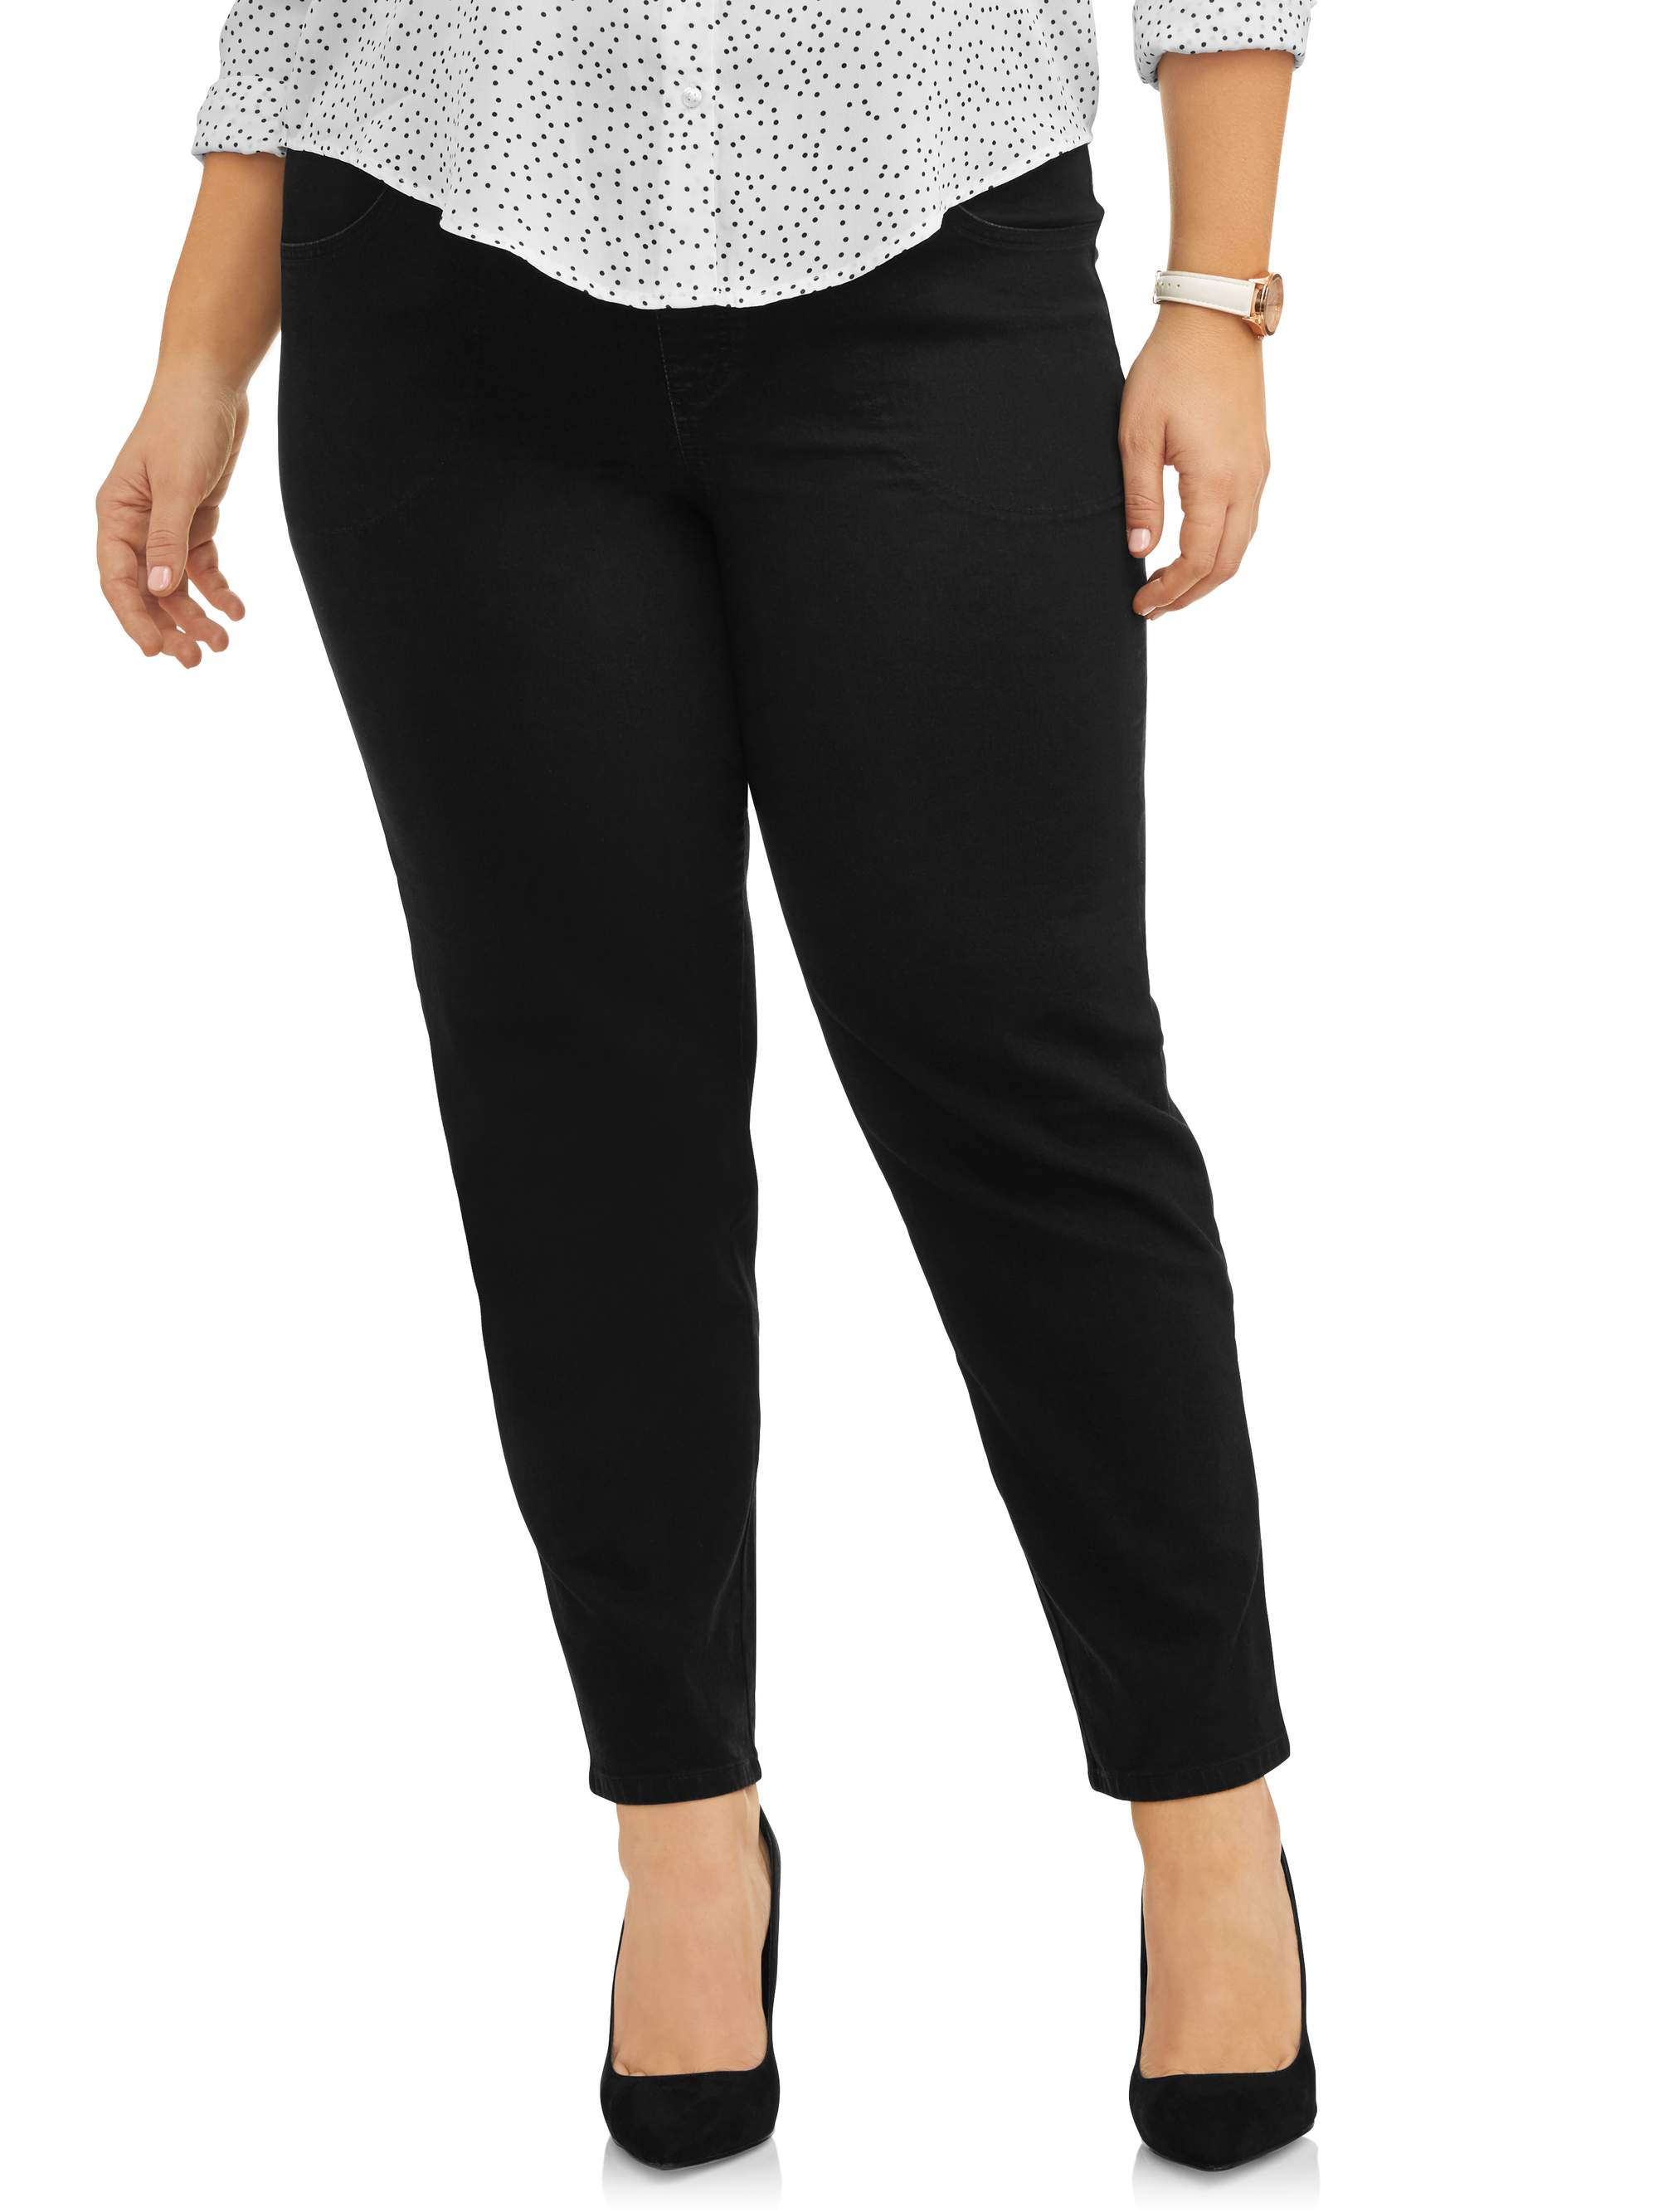 Just My Size Women's Plus 2 Pocket Pull-On Pant - image 1 of 6